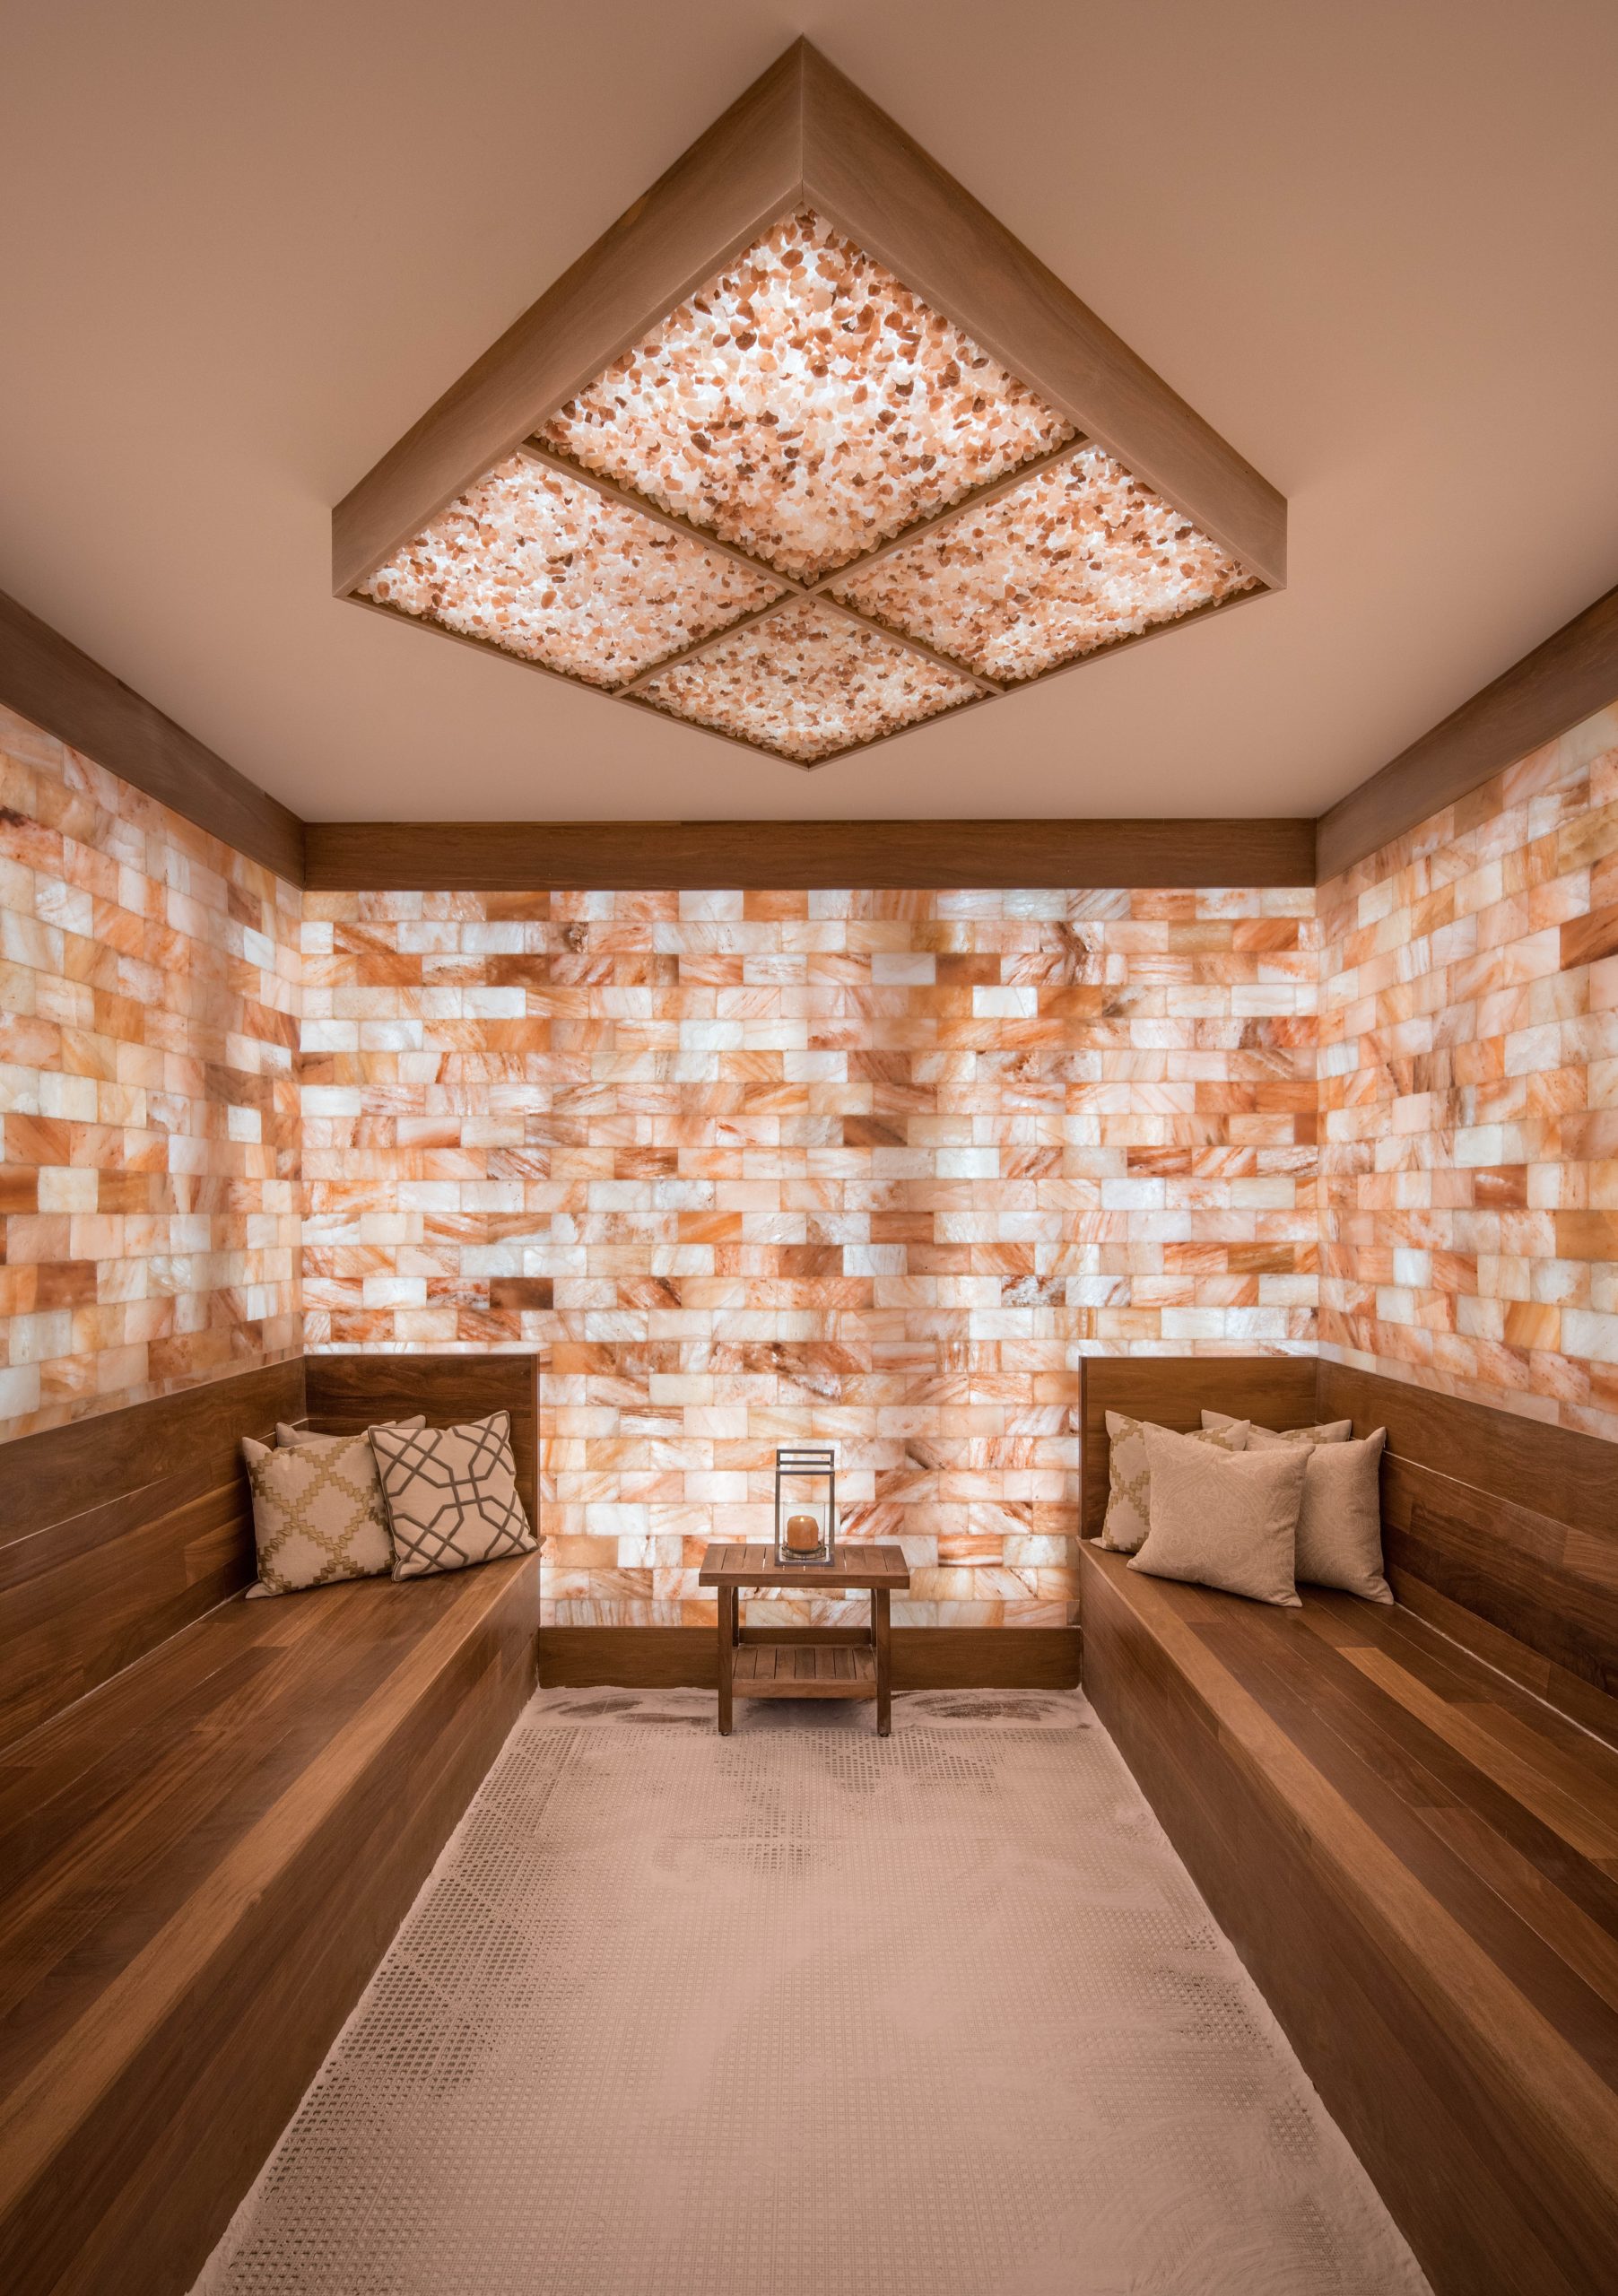 Two Wooden Booths With Three Pillow Son Each Surrounded By Led Backlit Salt Panels With A Diamond Salt Brick Ceiling Fixture At Palm Health - Ladue, Missouri.